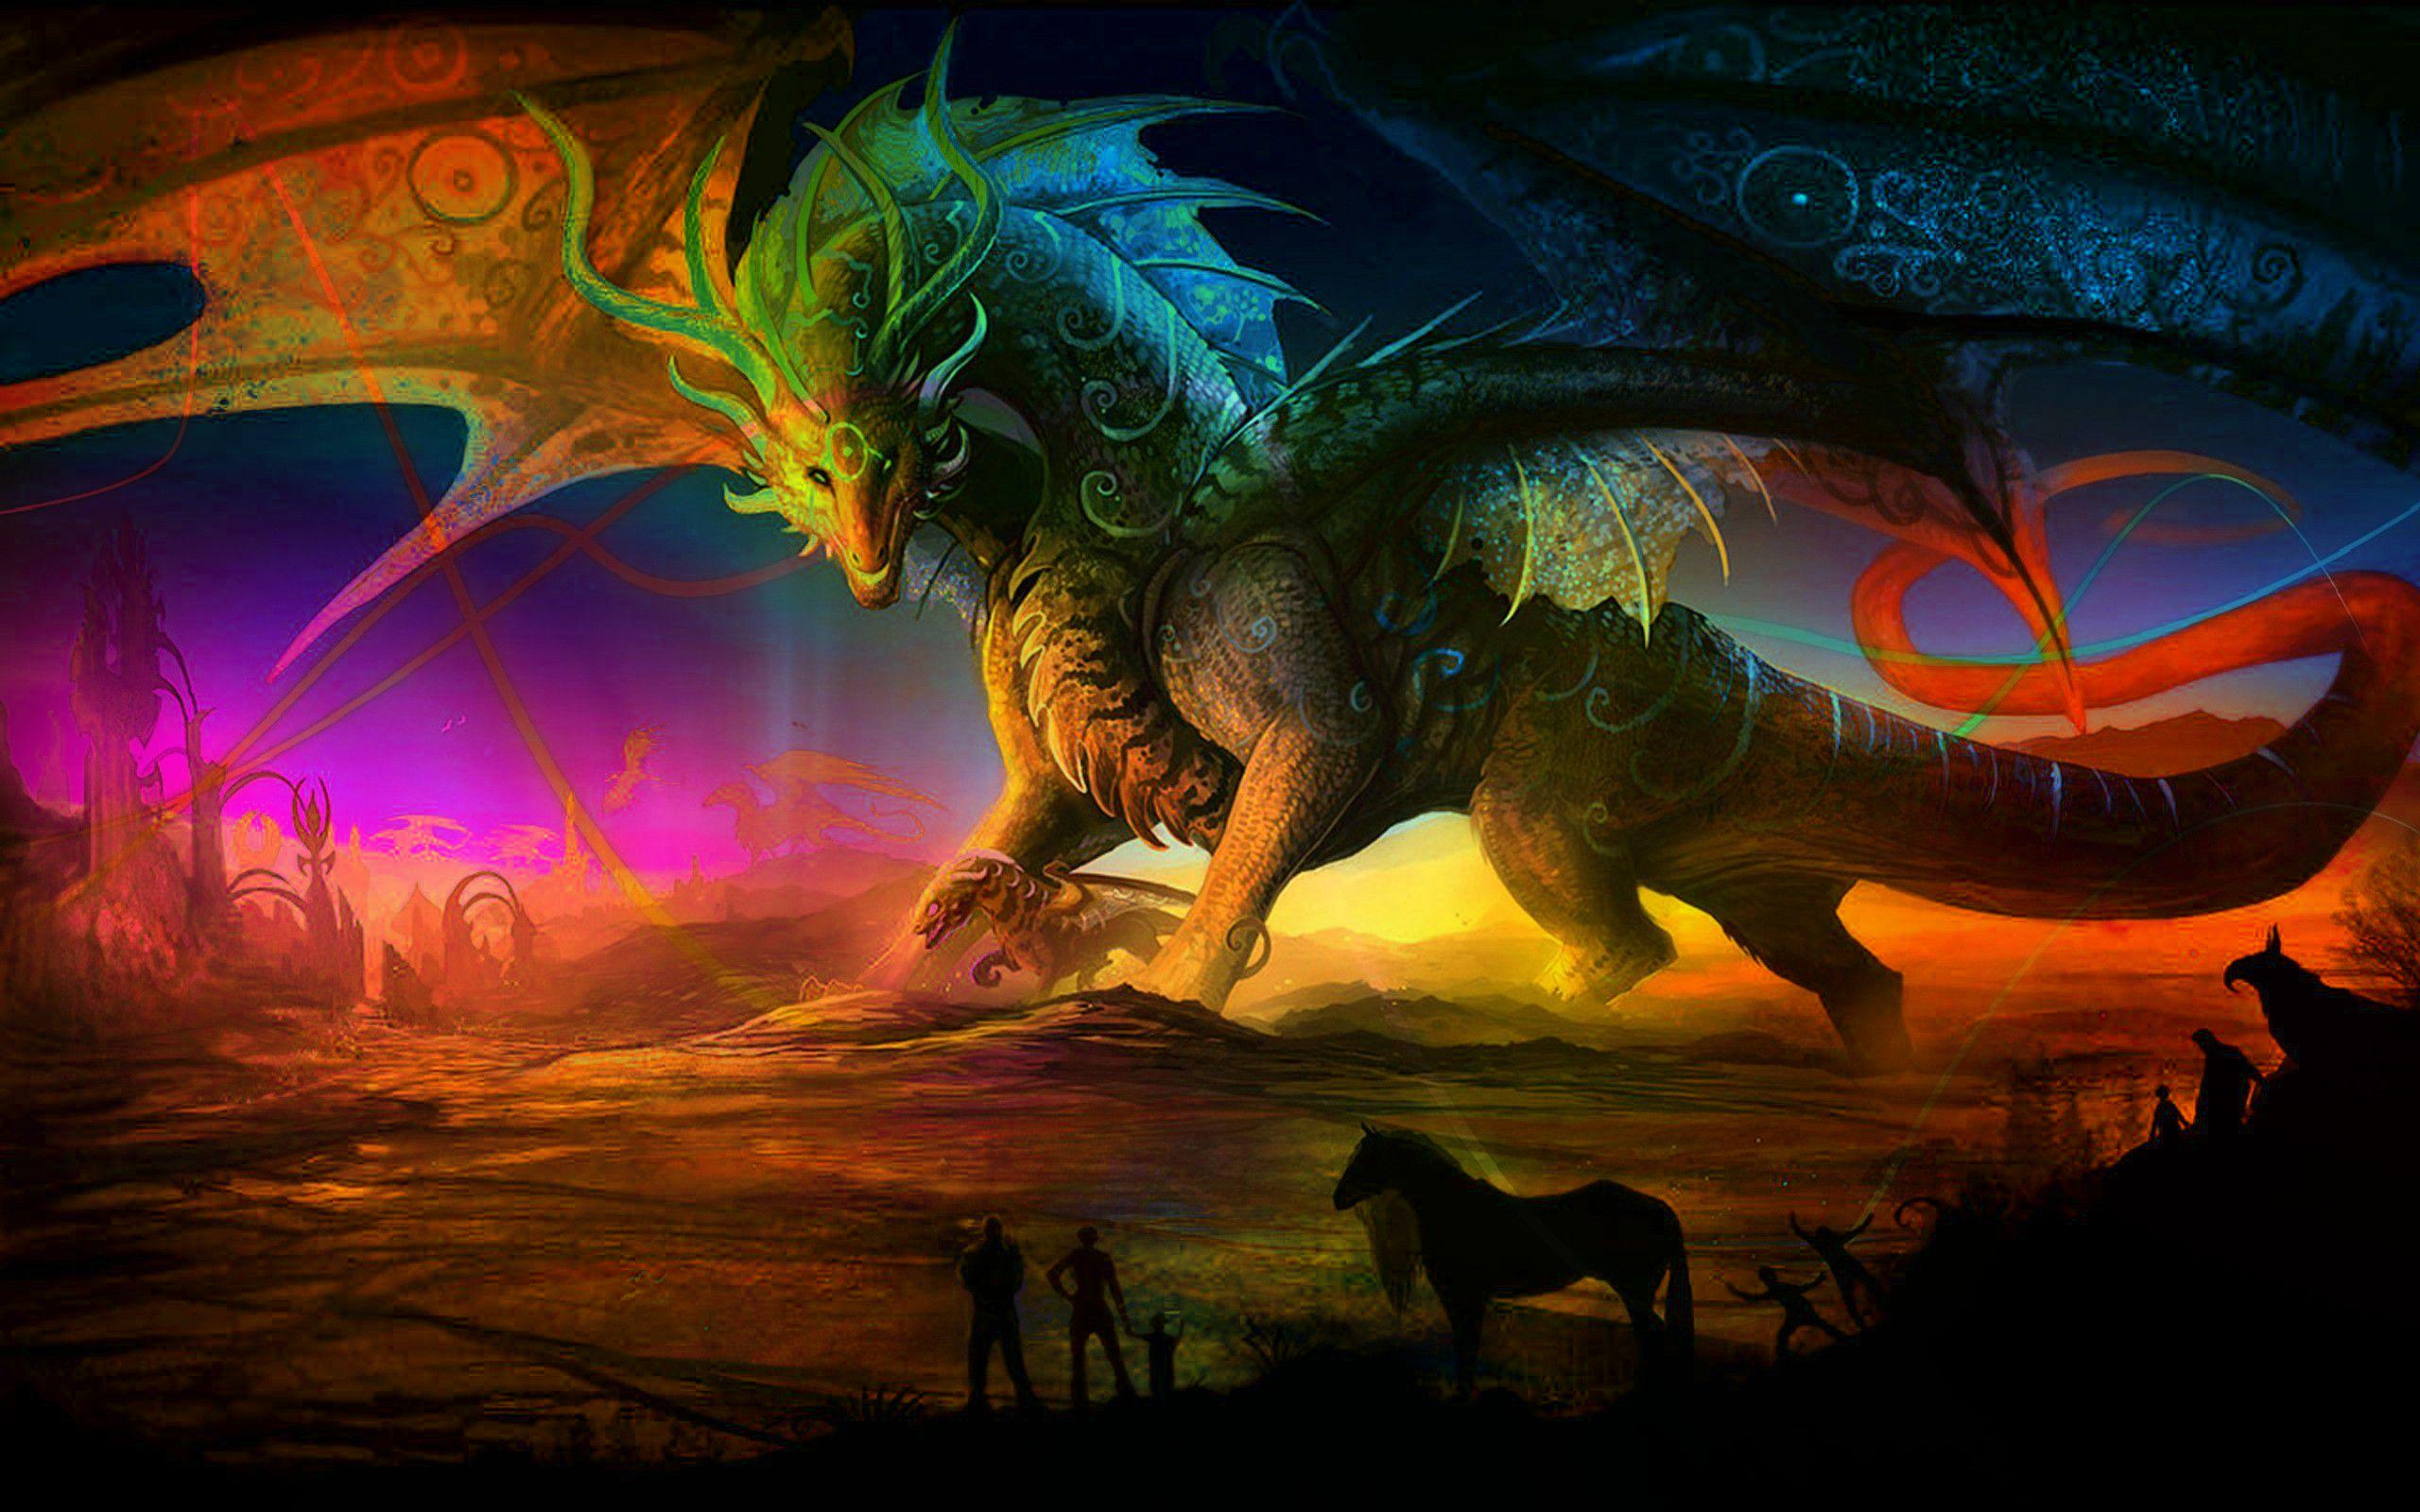 fantasy wallpaper; castles, sorcery, dragons and maidens